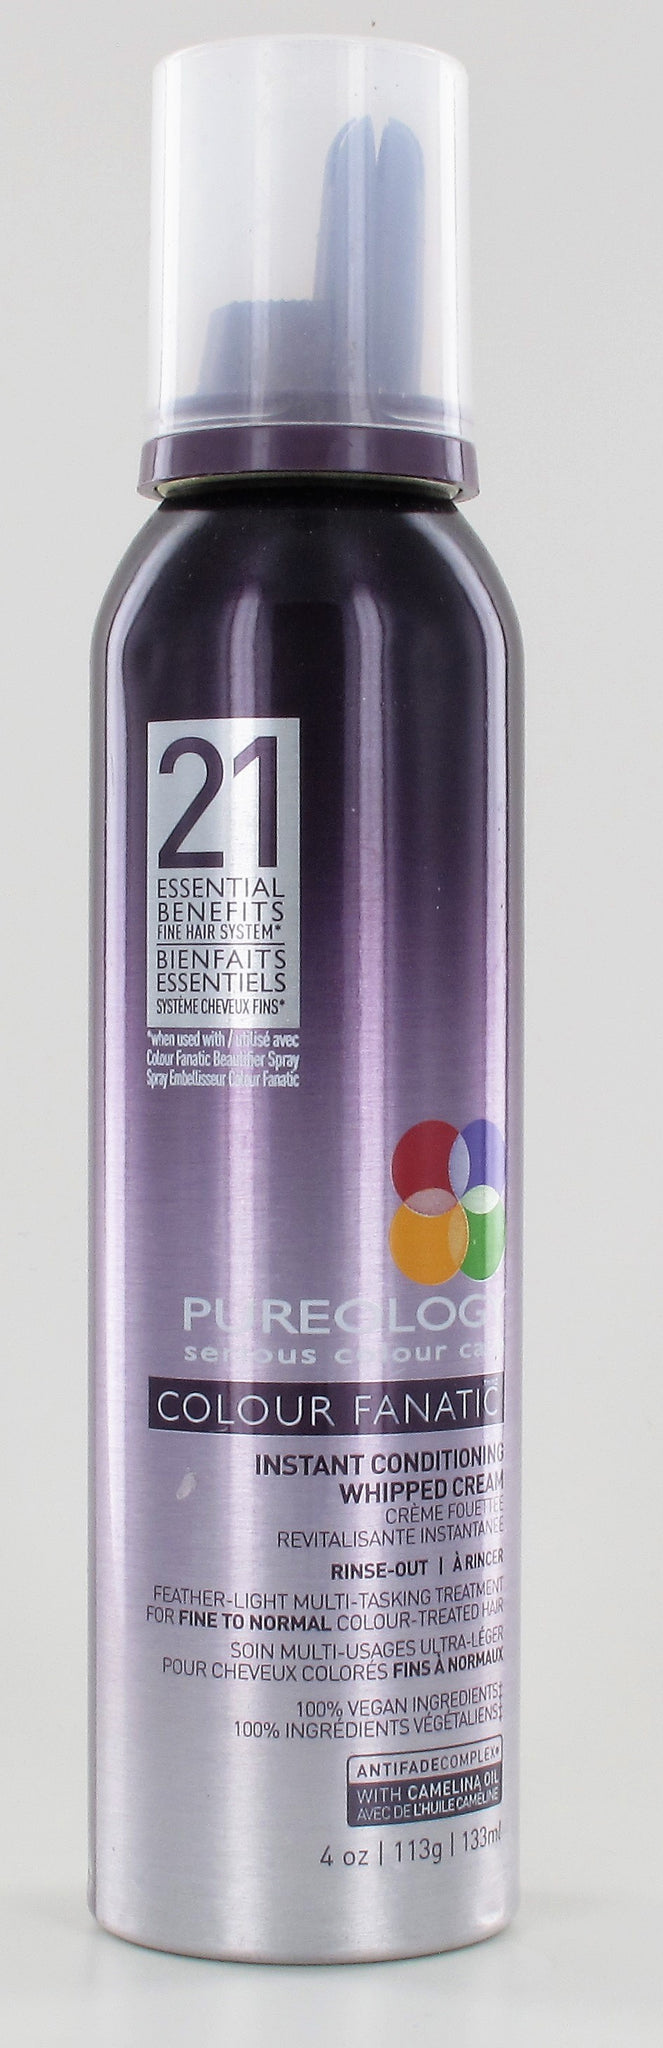 Pureology Colour Fanatic Instant Conditioning Whipped Cream 4 Oz